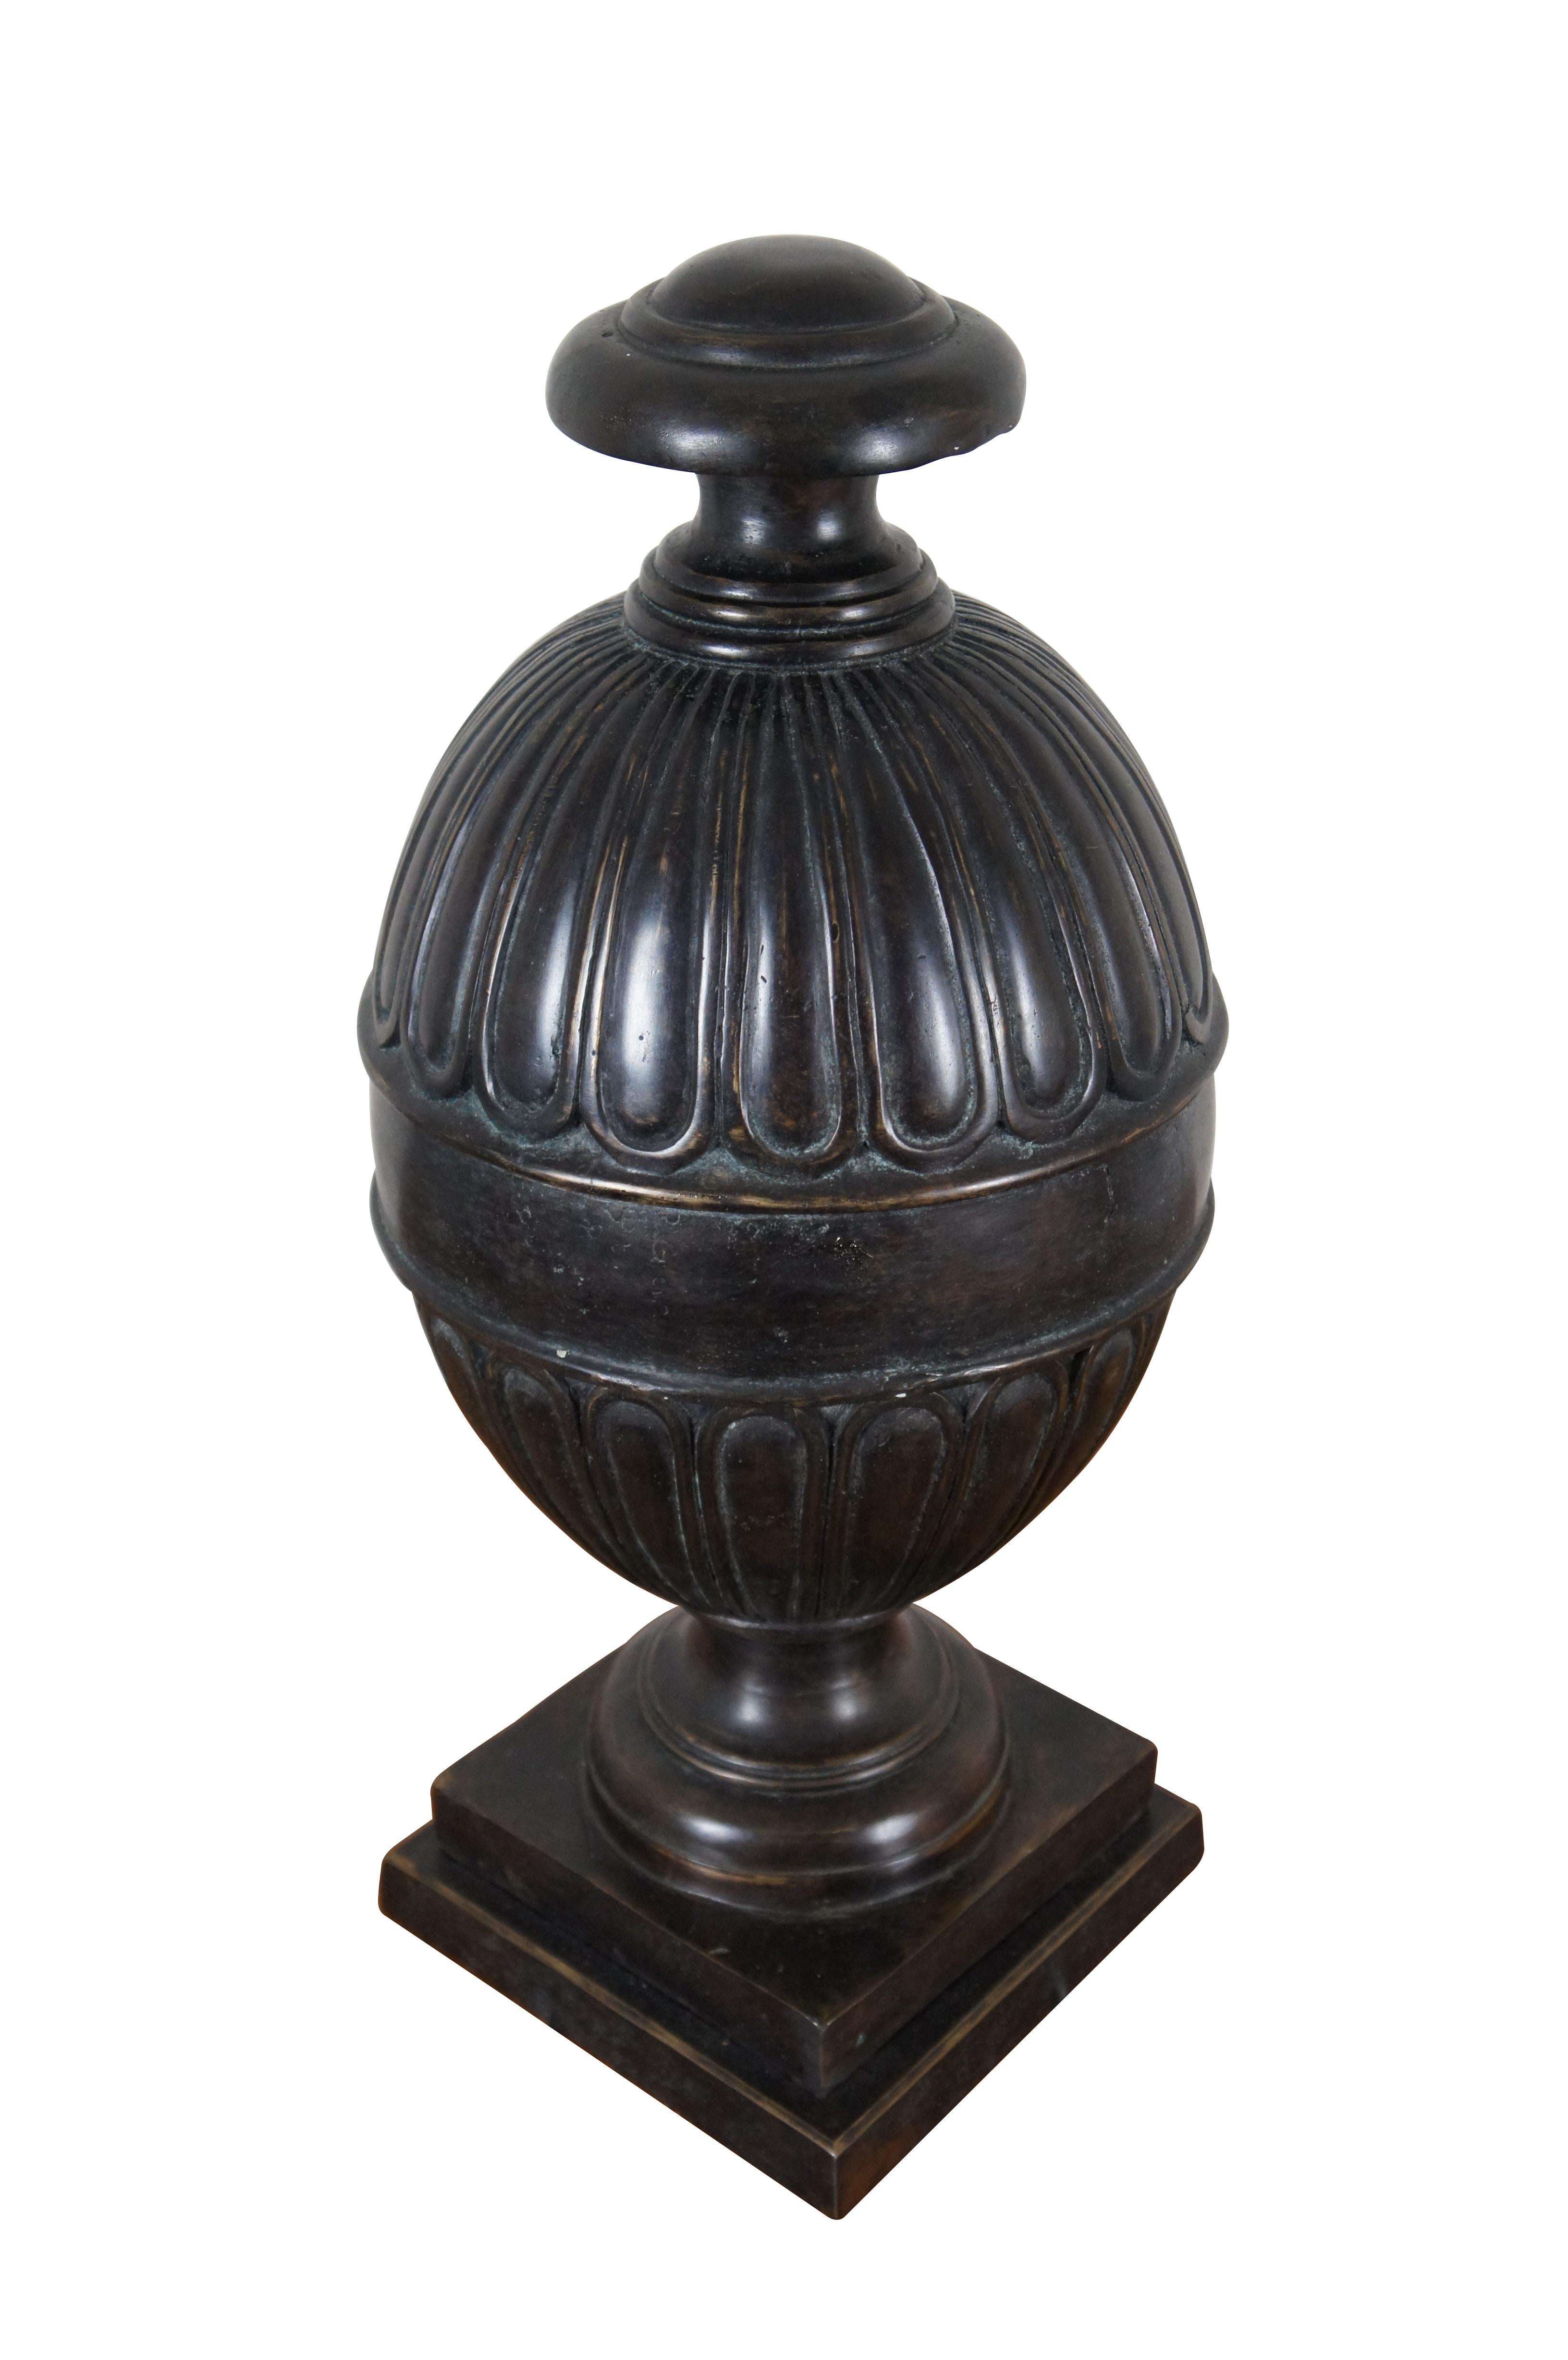 Vintage heavy Maitland Smith bronze mantel urn / vase or compote featuring Neoclassical style with a footed pedestal base supporting an egg shaped box / jar.

Dimensions:
9.75